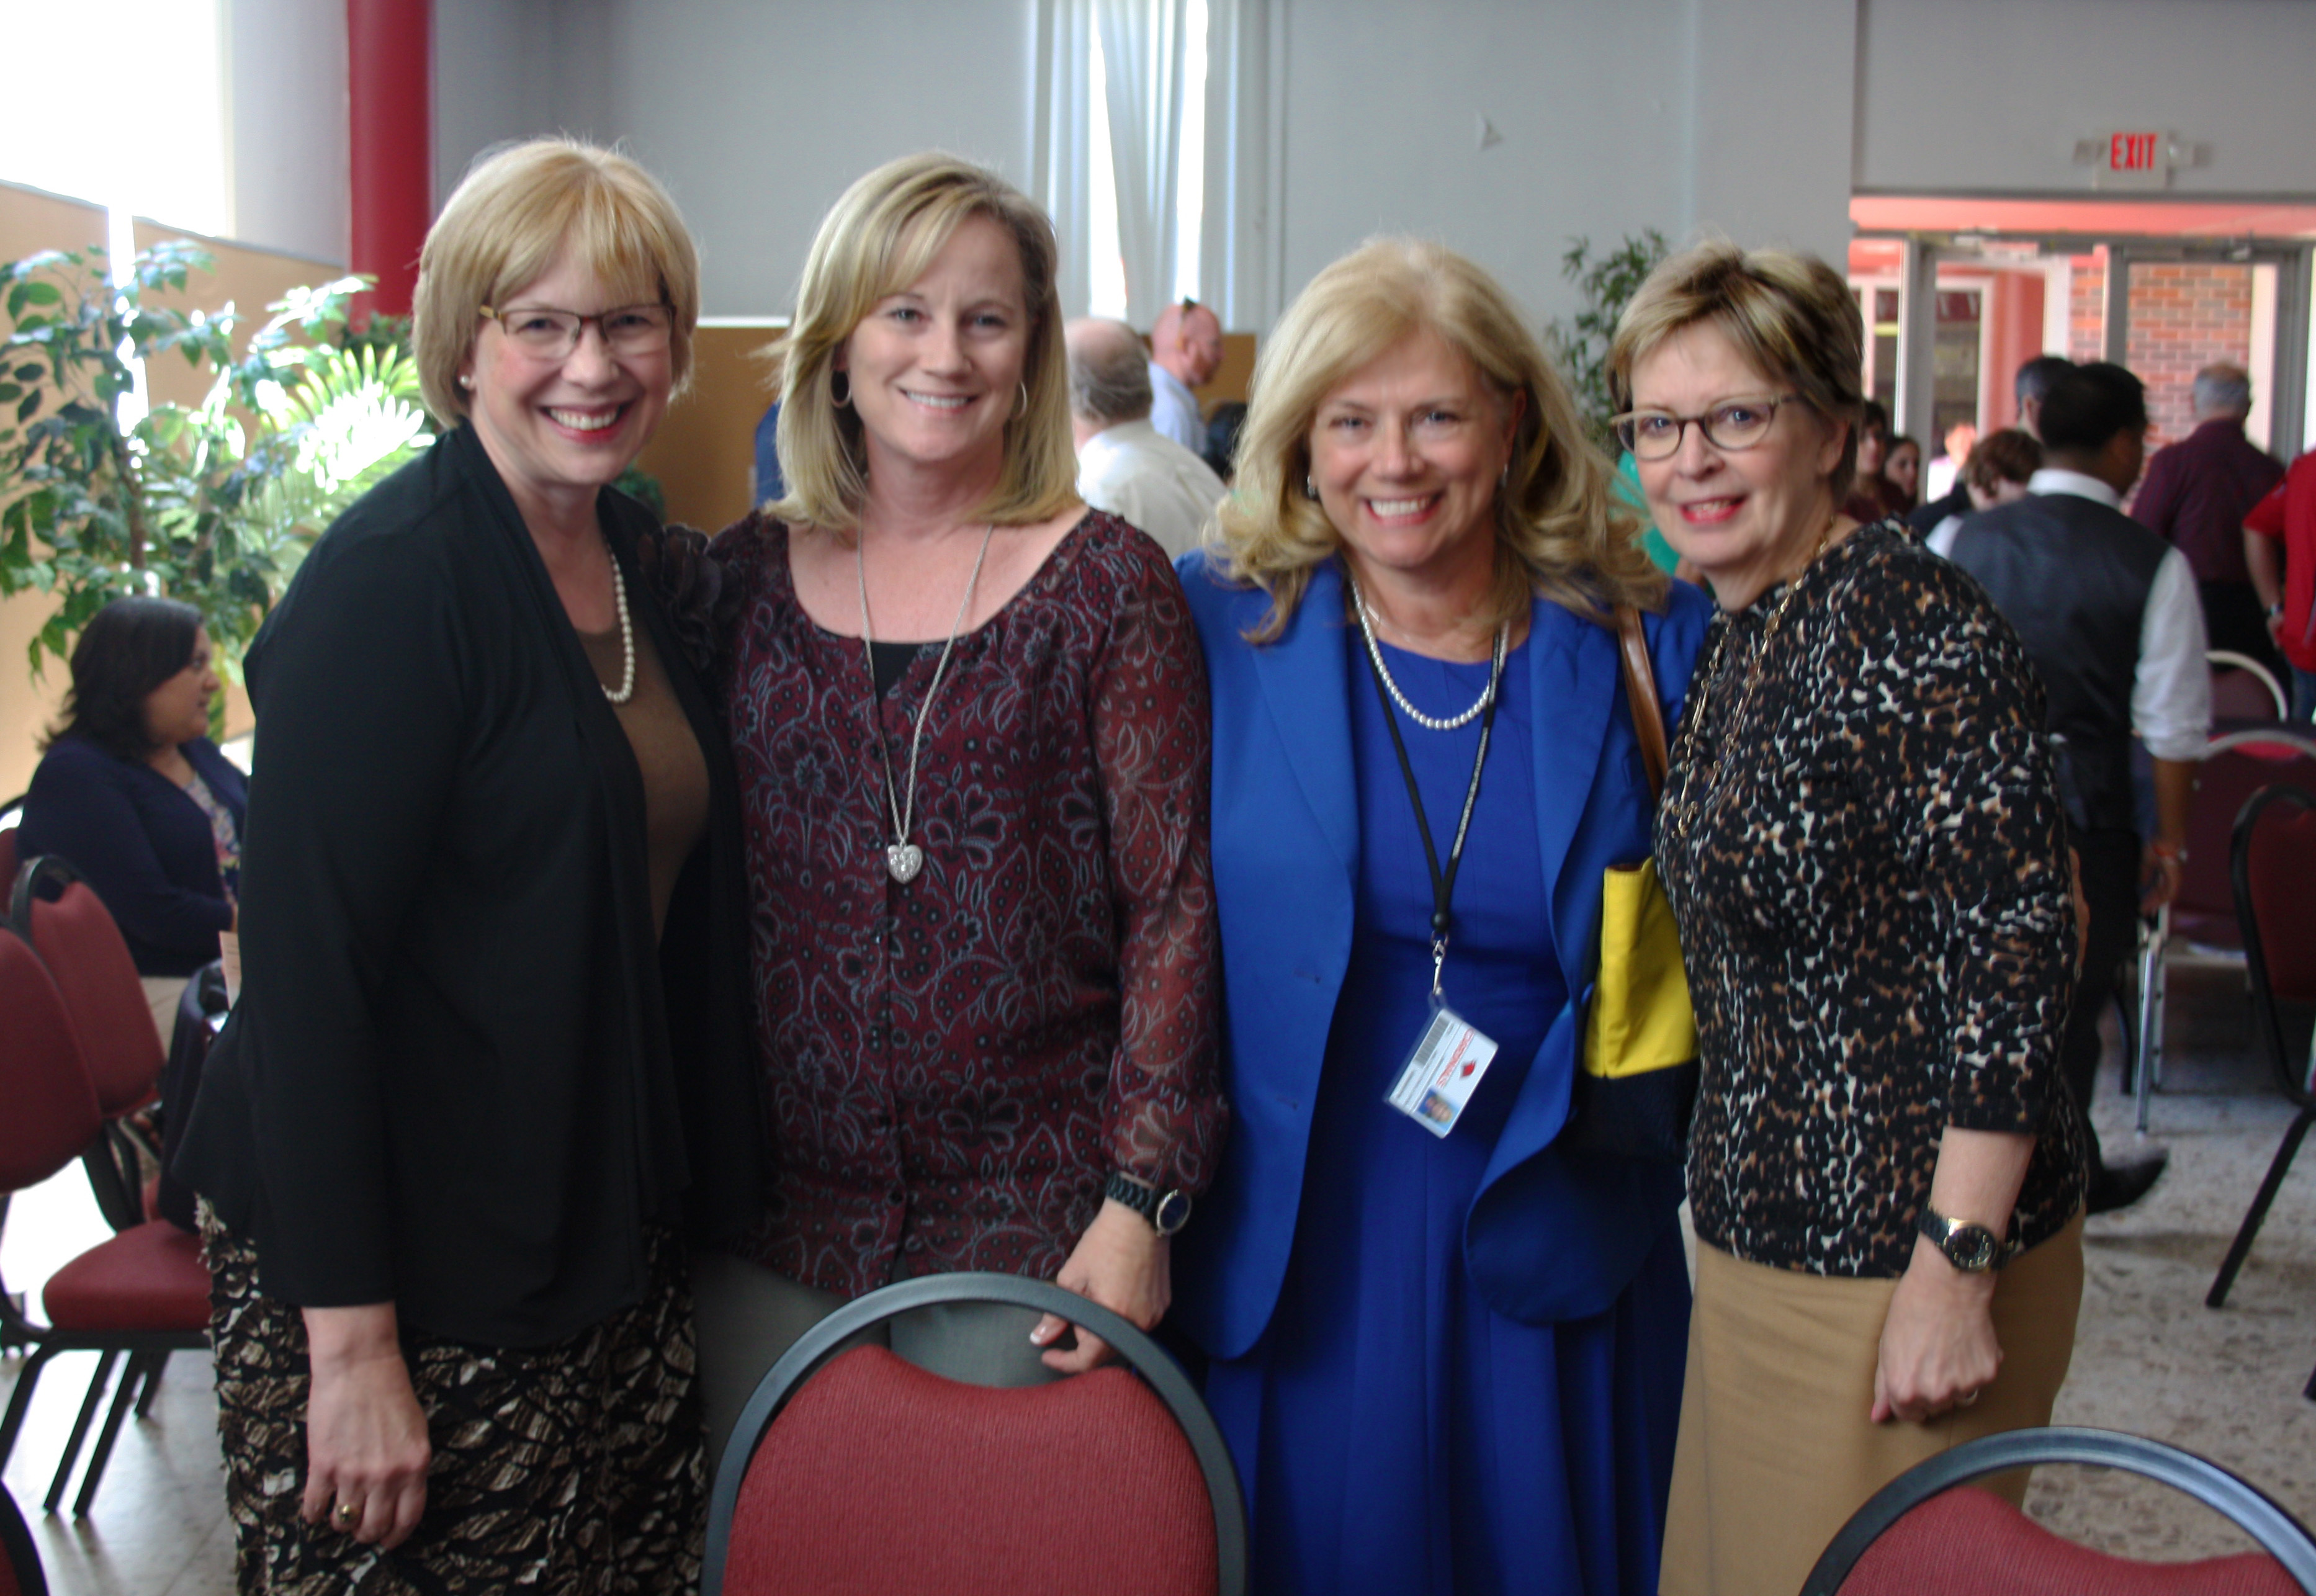 Dr. Robin Madson, Mary Teal, Dr, Corinne Bell, and Dr. Kathi Light